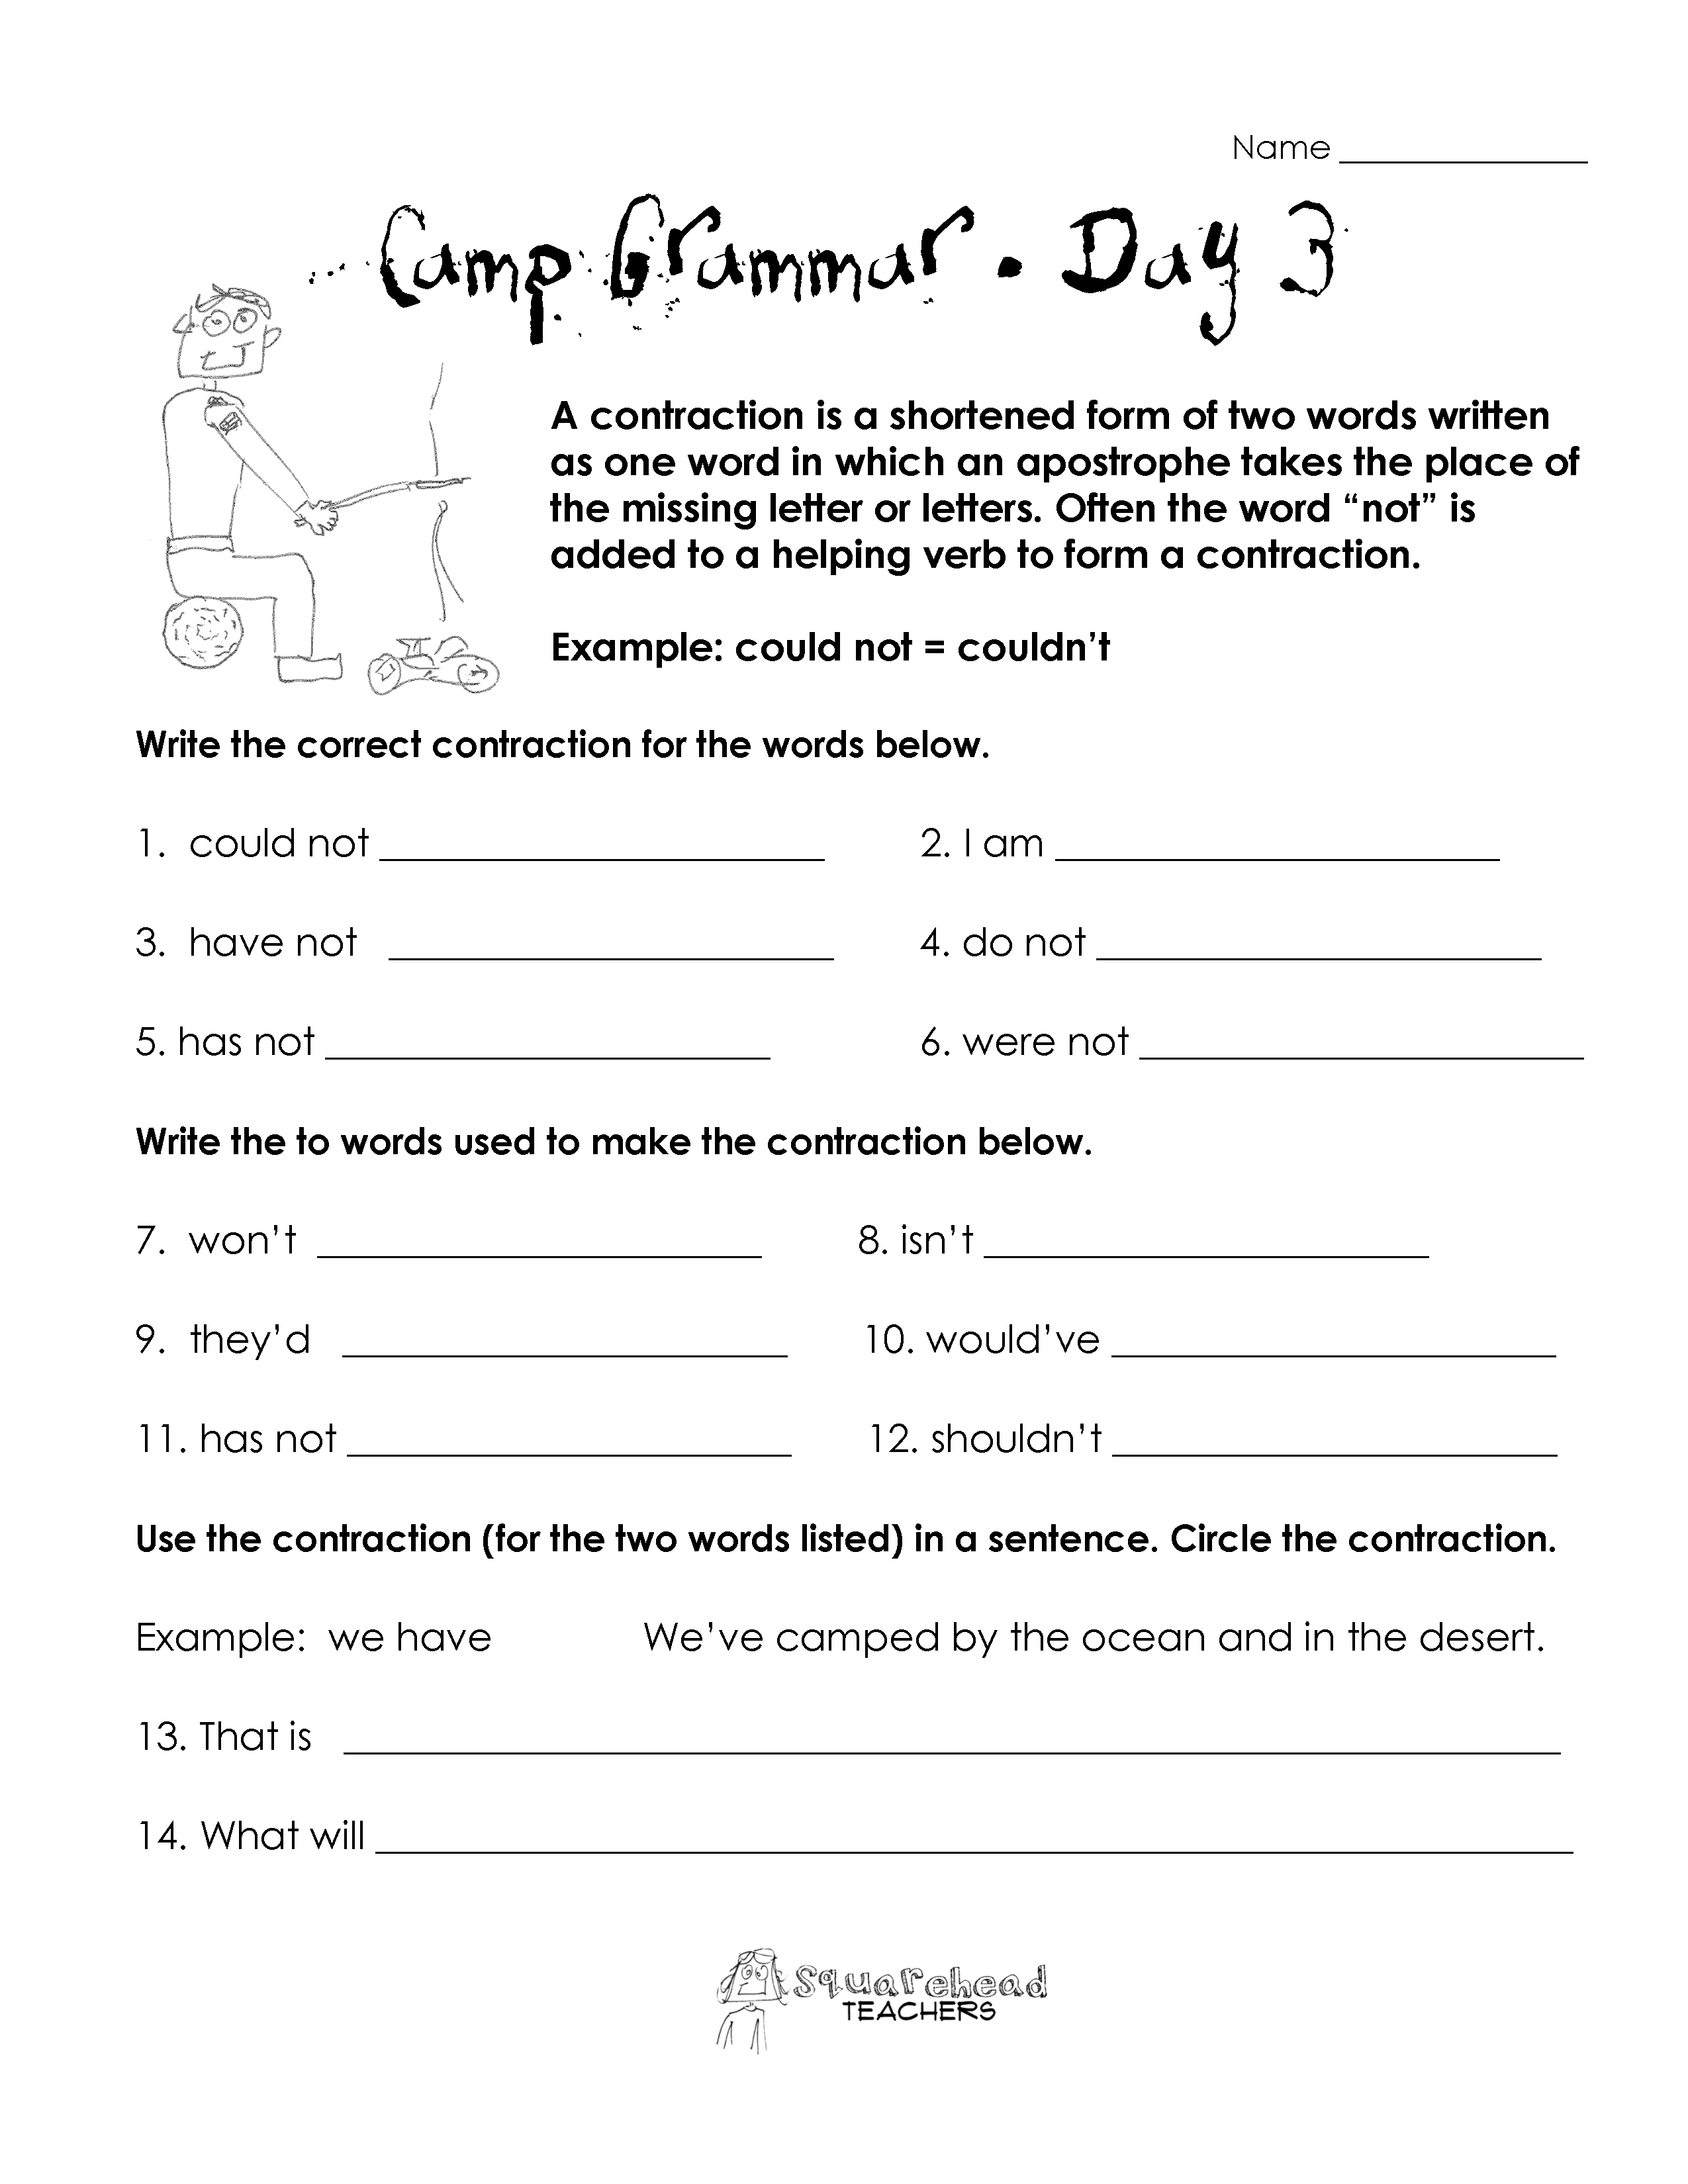 Grammar and Punctuation Worksheets Grade 3